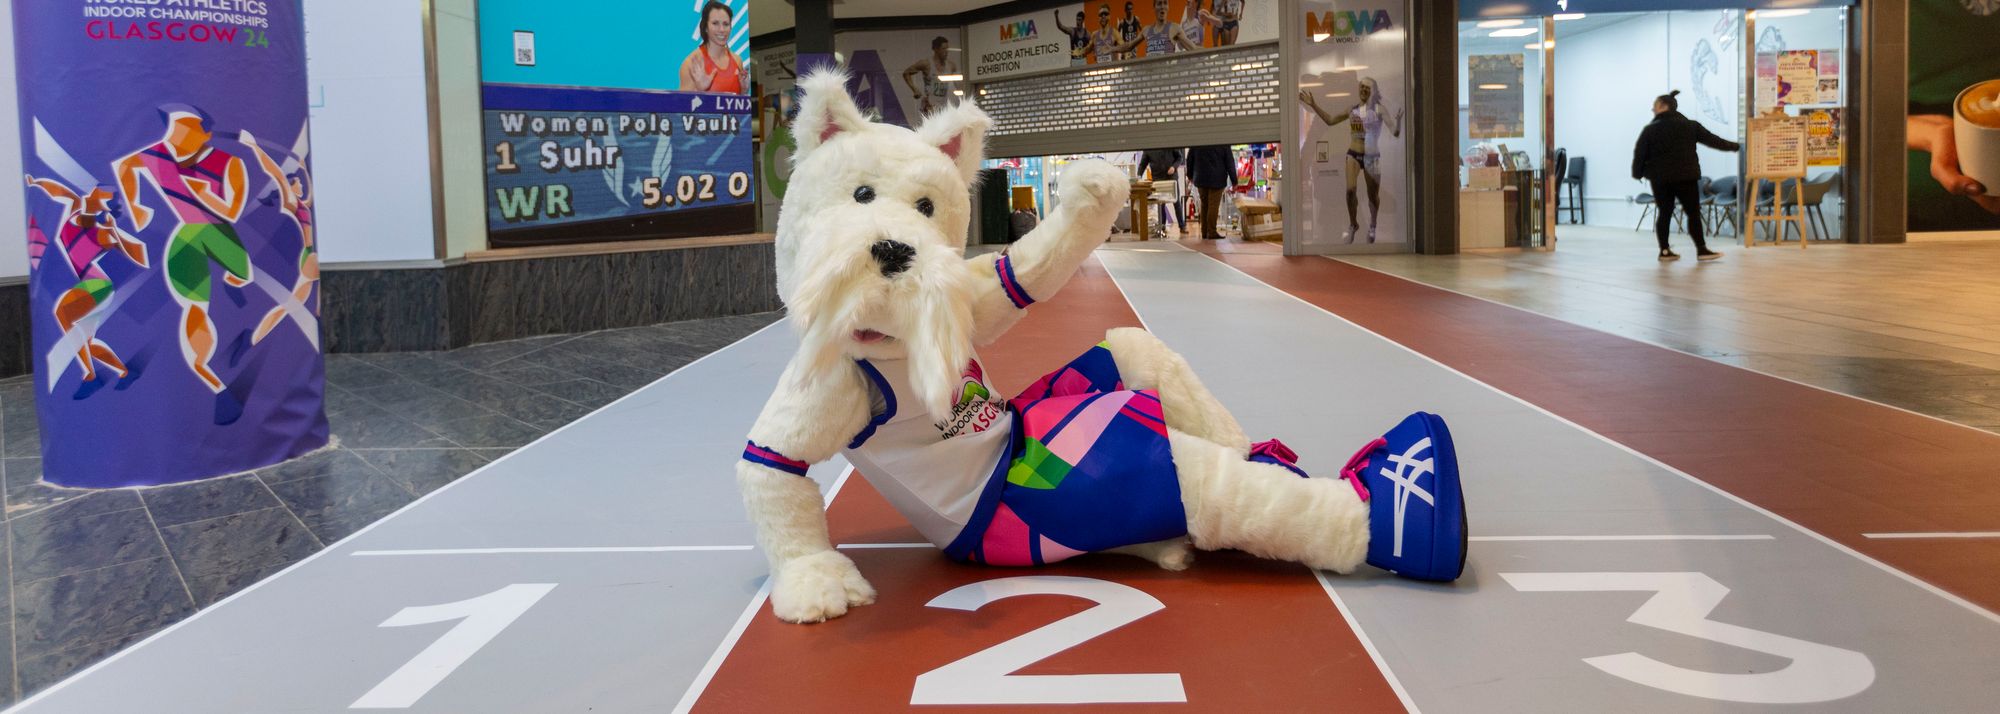 With just one month to go, athletes across the globe are competing to secure the final few places at the 2024 World Athletics Indoor Championships in Glasgow. However, having stolen a lead on the pack, organisers are excited to confirm their selection of Scottee the Scottish Terrier, as the official event mascot and friendly face of the Championships.